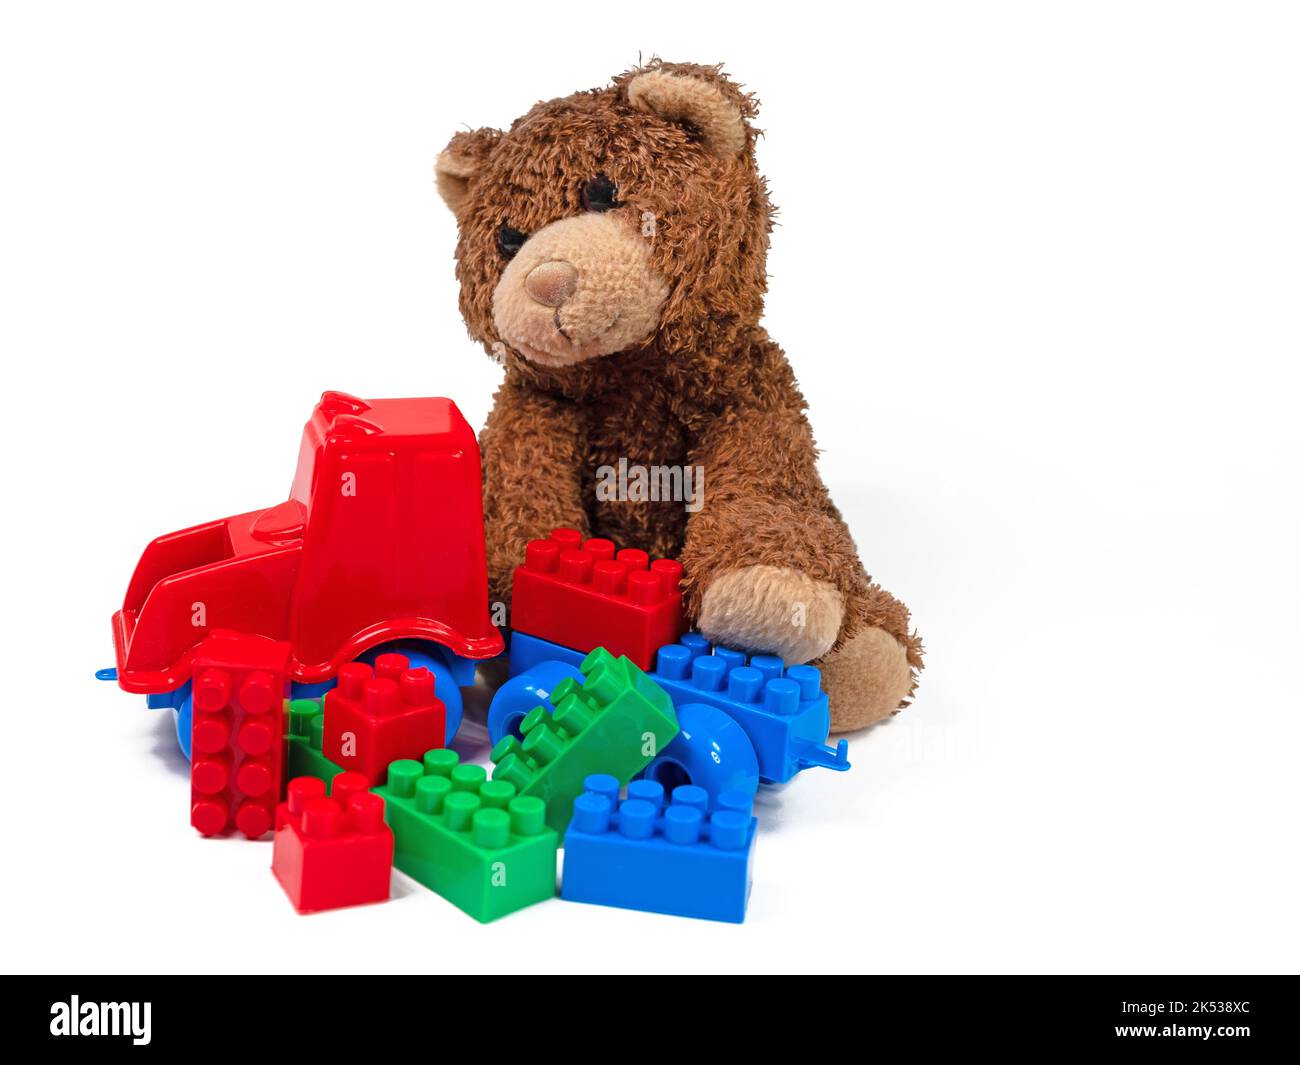 Plush bear and plastic building blocks against a white background Stock Photo